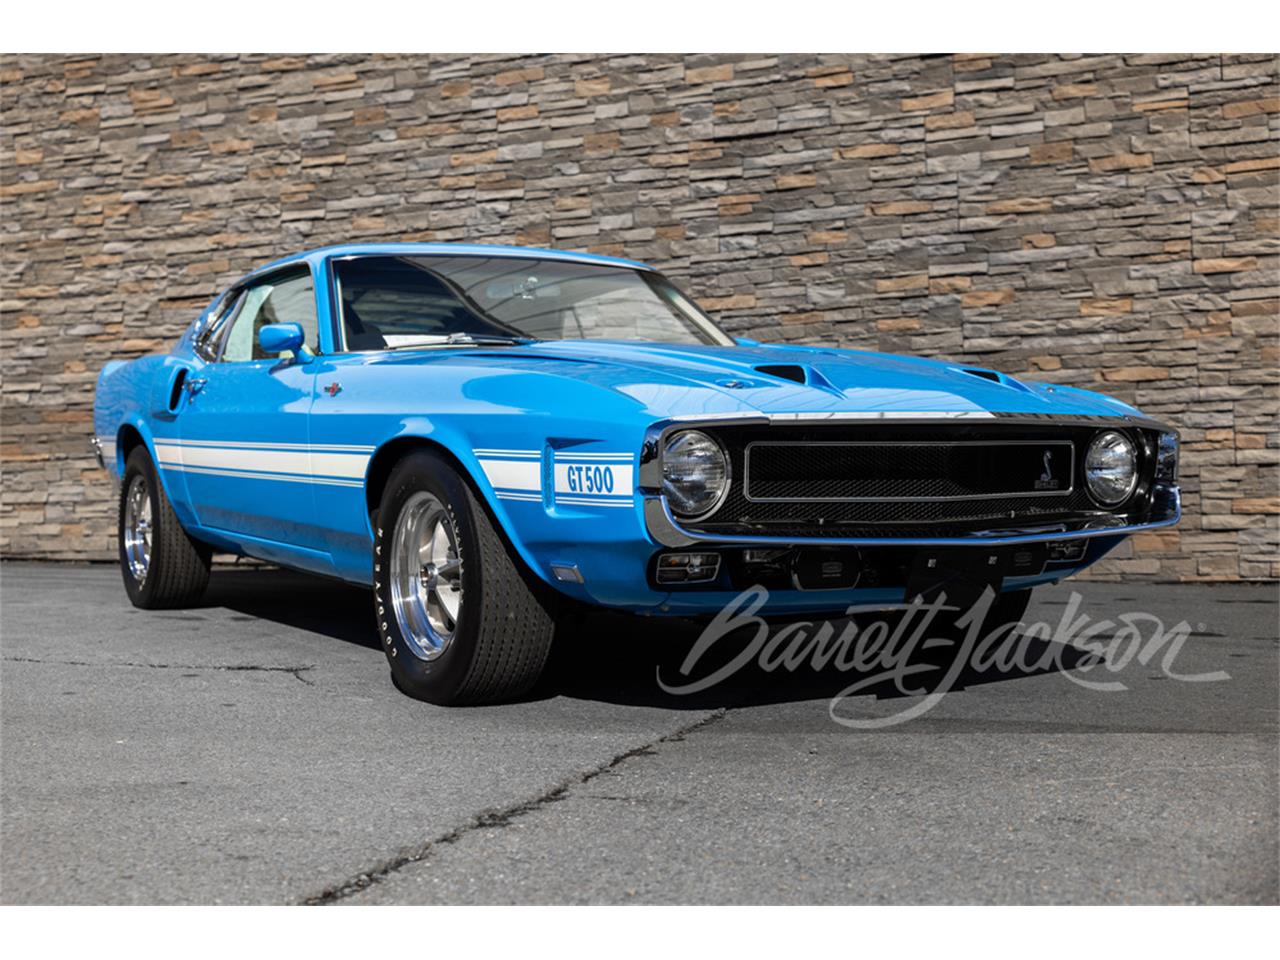 For Sale at Auction: 1969 Shelby GT500 in Scottsdale, Arizona for sale in Scottsdale, AZ